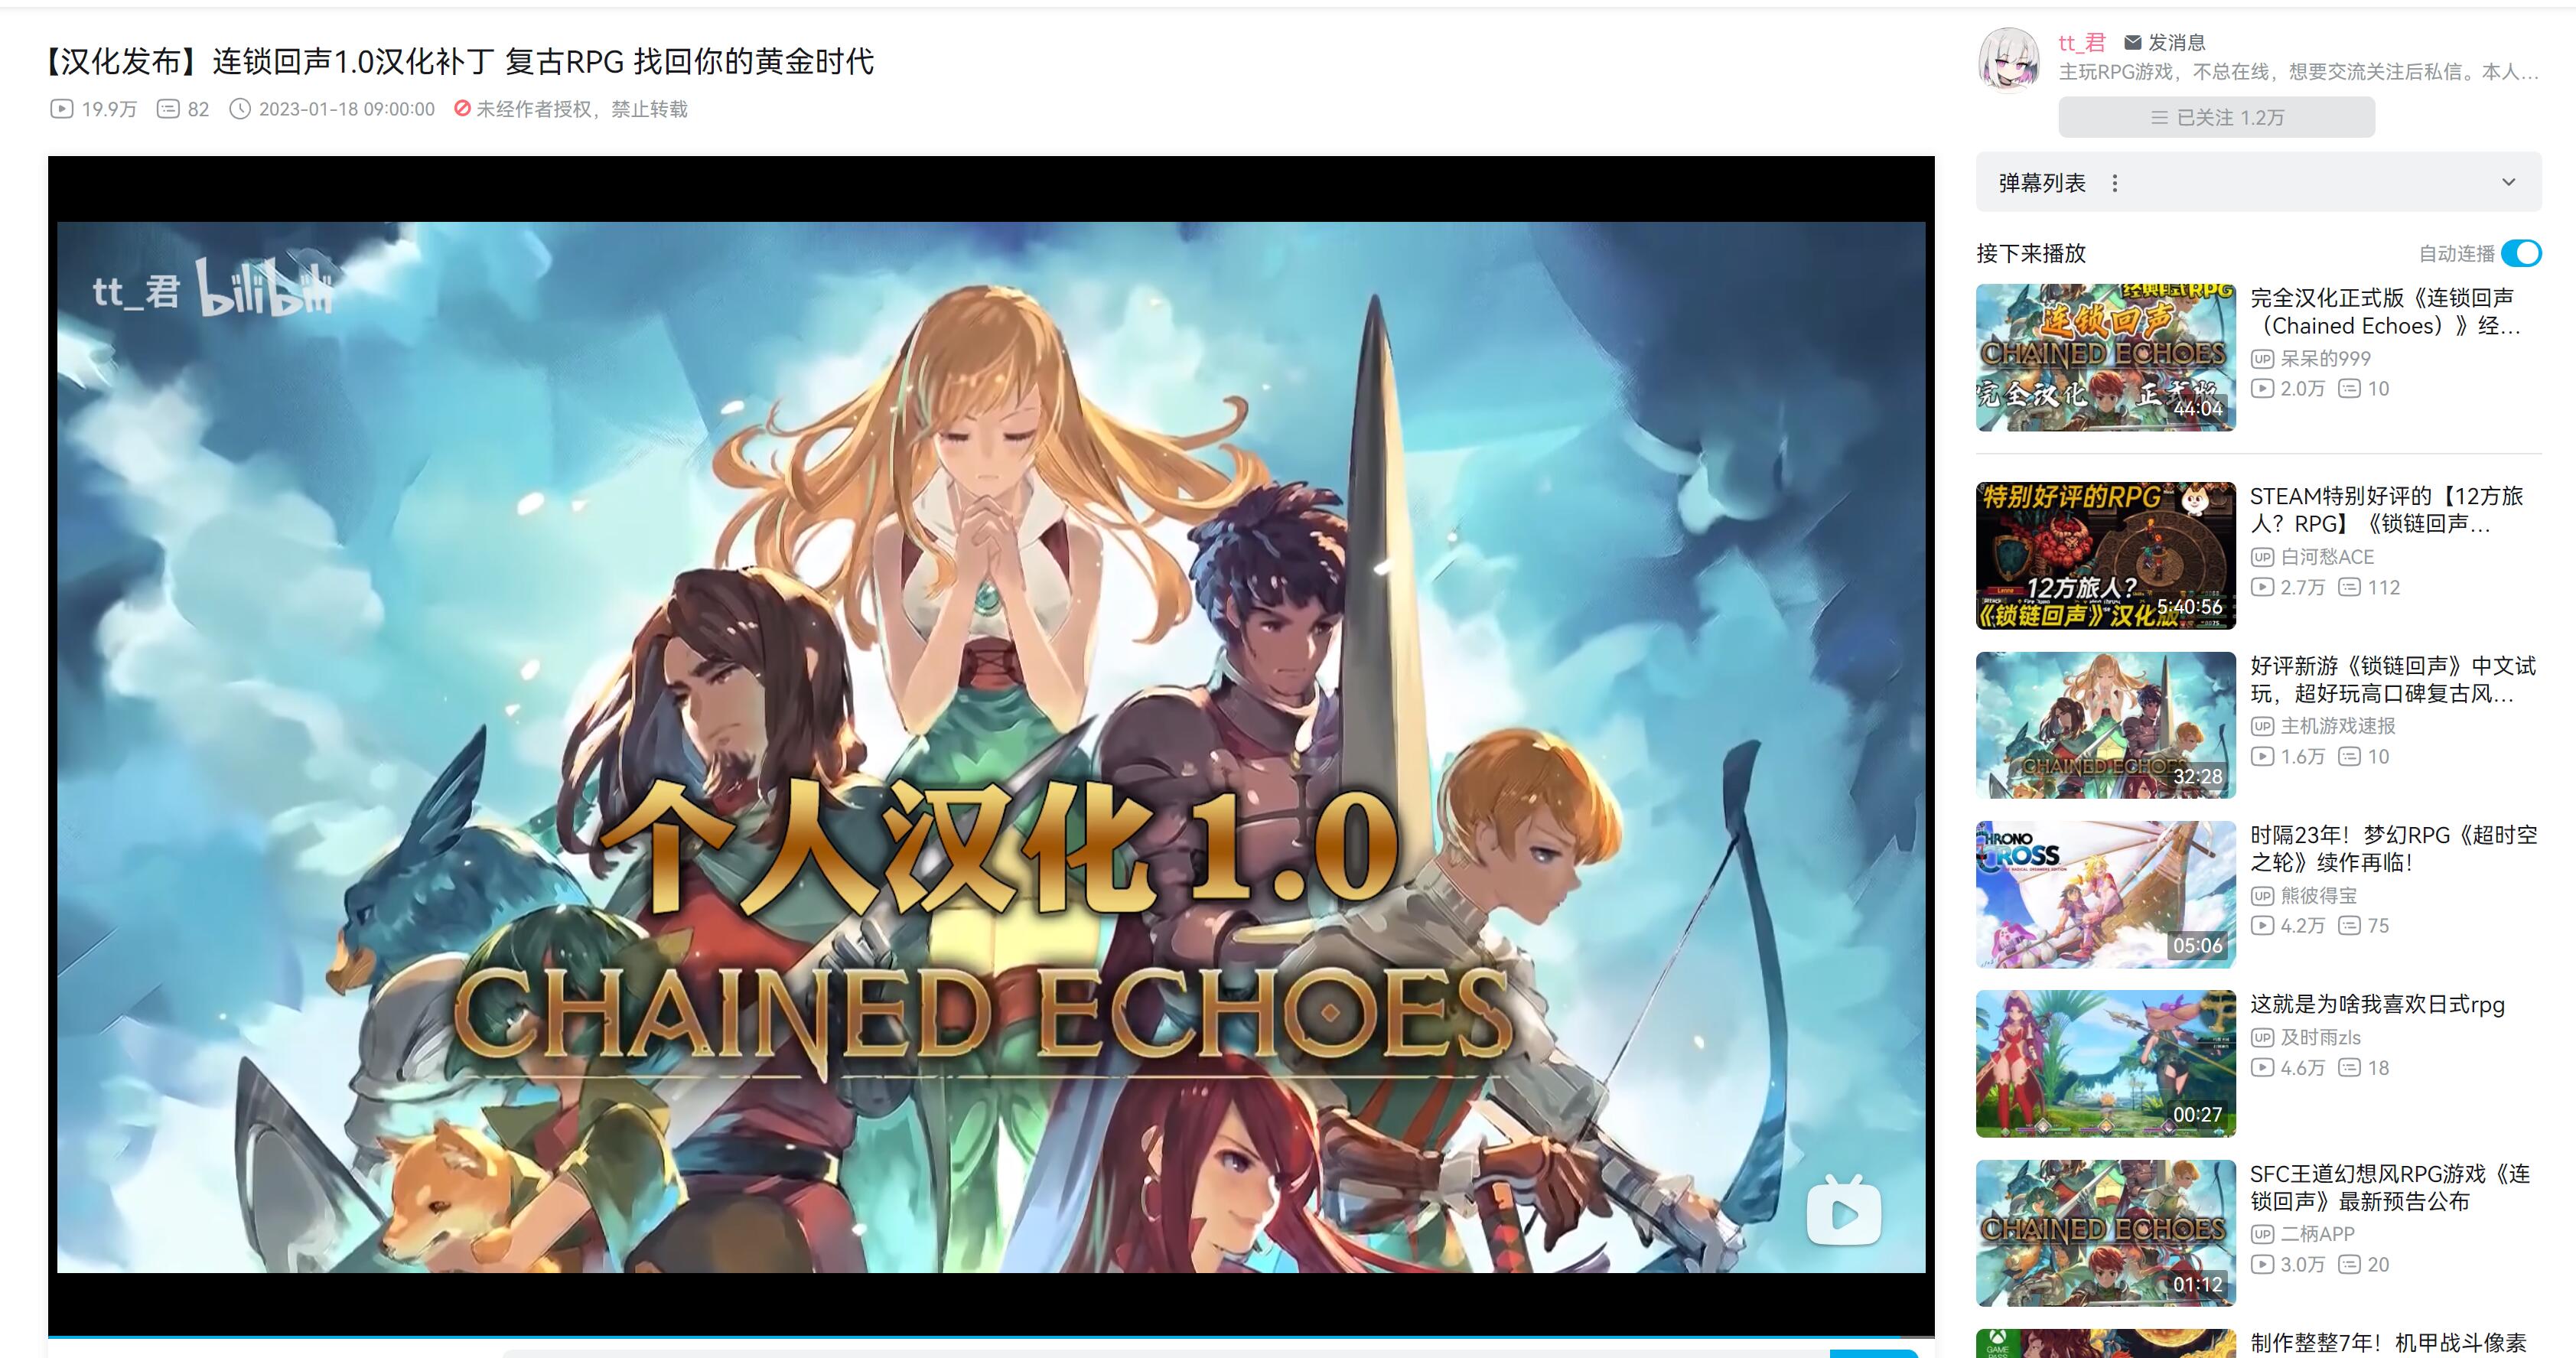 《Chained Echoes》：來自JRPG黃金年代的一聲「回響」